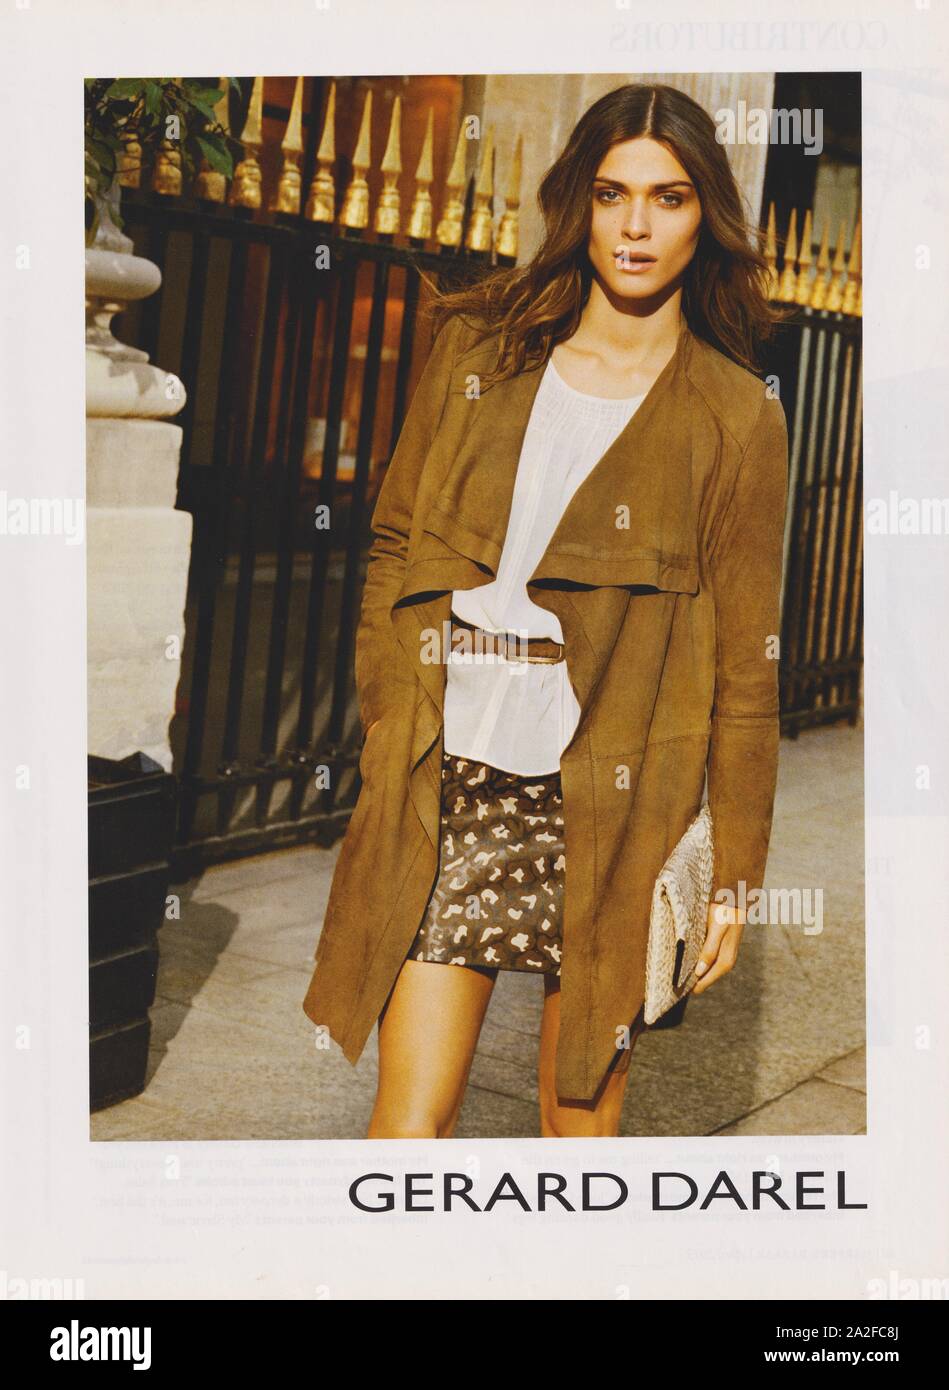 poster advertising Gerard Darel fashion house with Elisa Sednaoui in paper  magazine from 2013 year, advertisement, creative Gerard Darel 2010s advert  Stock Photo - Alamy